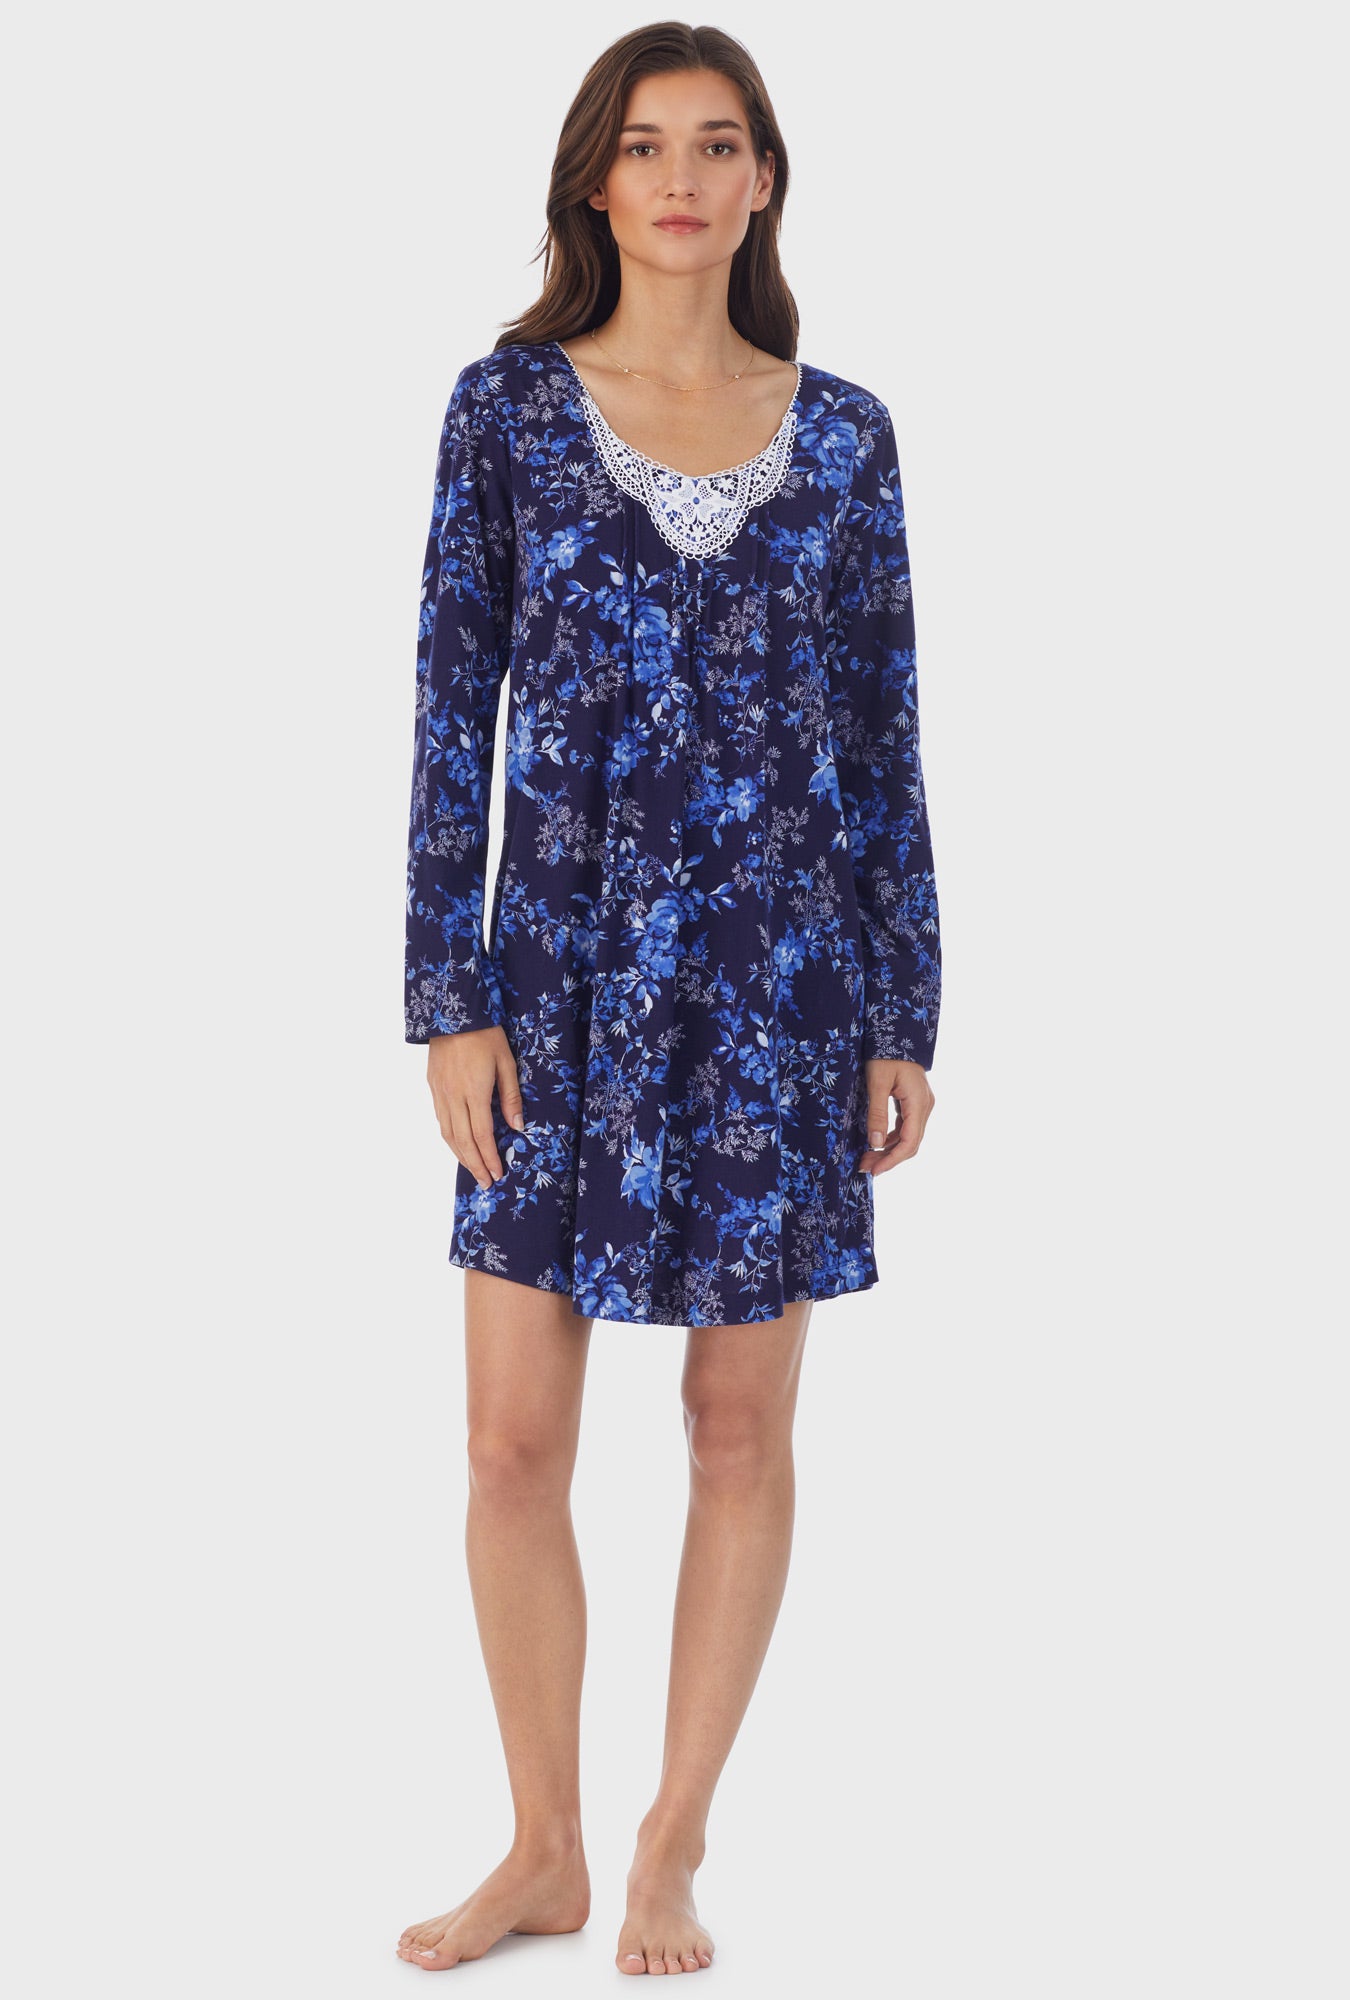 A lady wearing navy long sleeve cotton short nightgown with navy floral print.